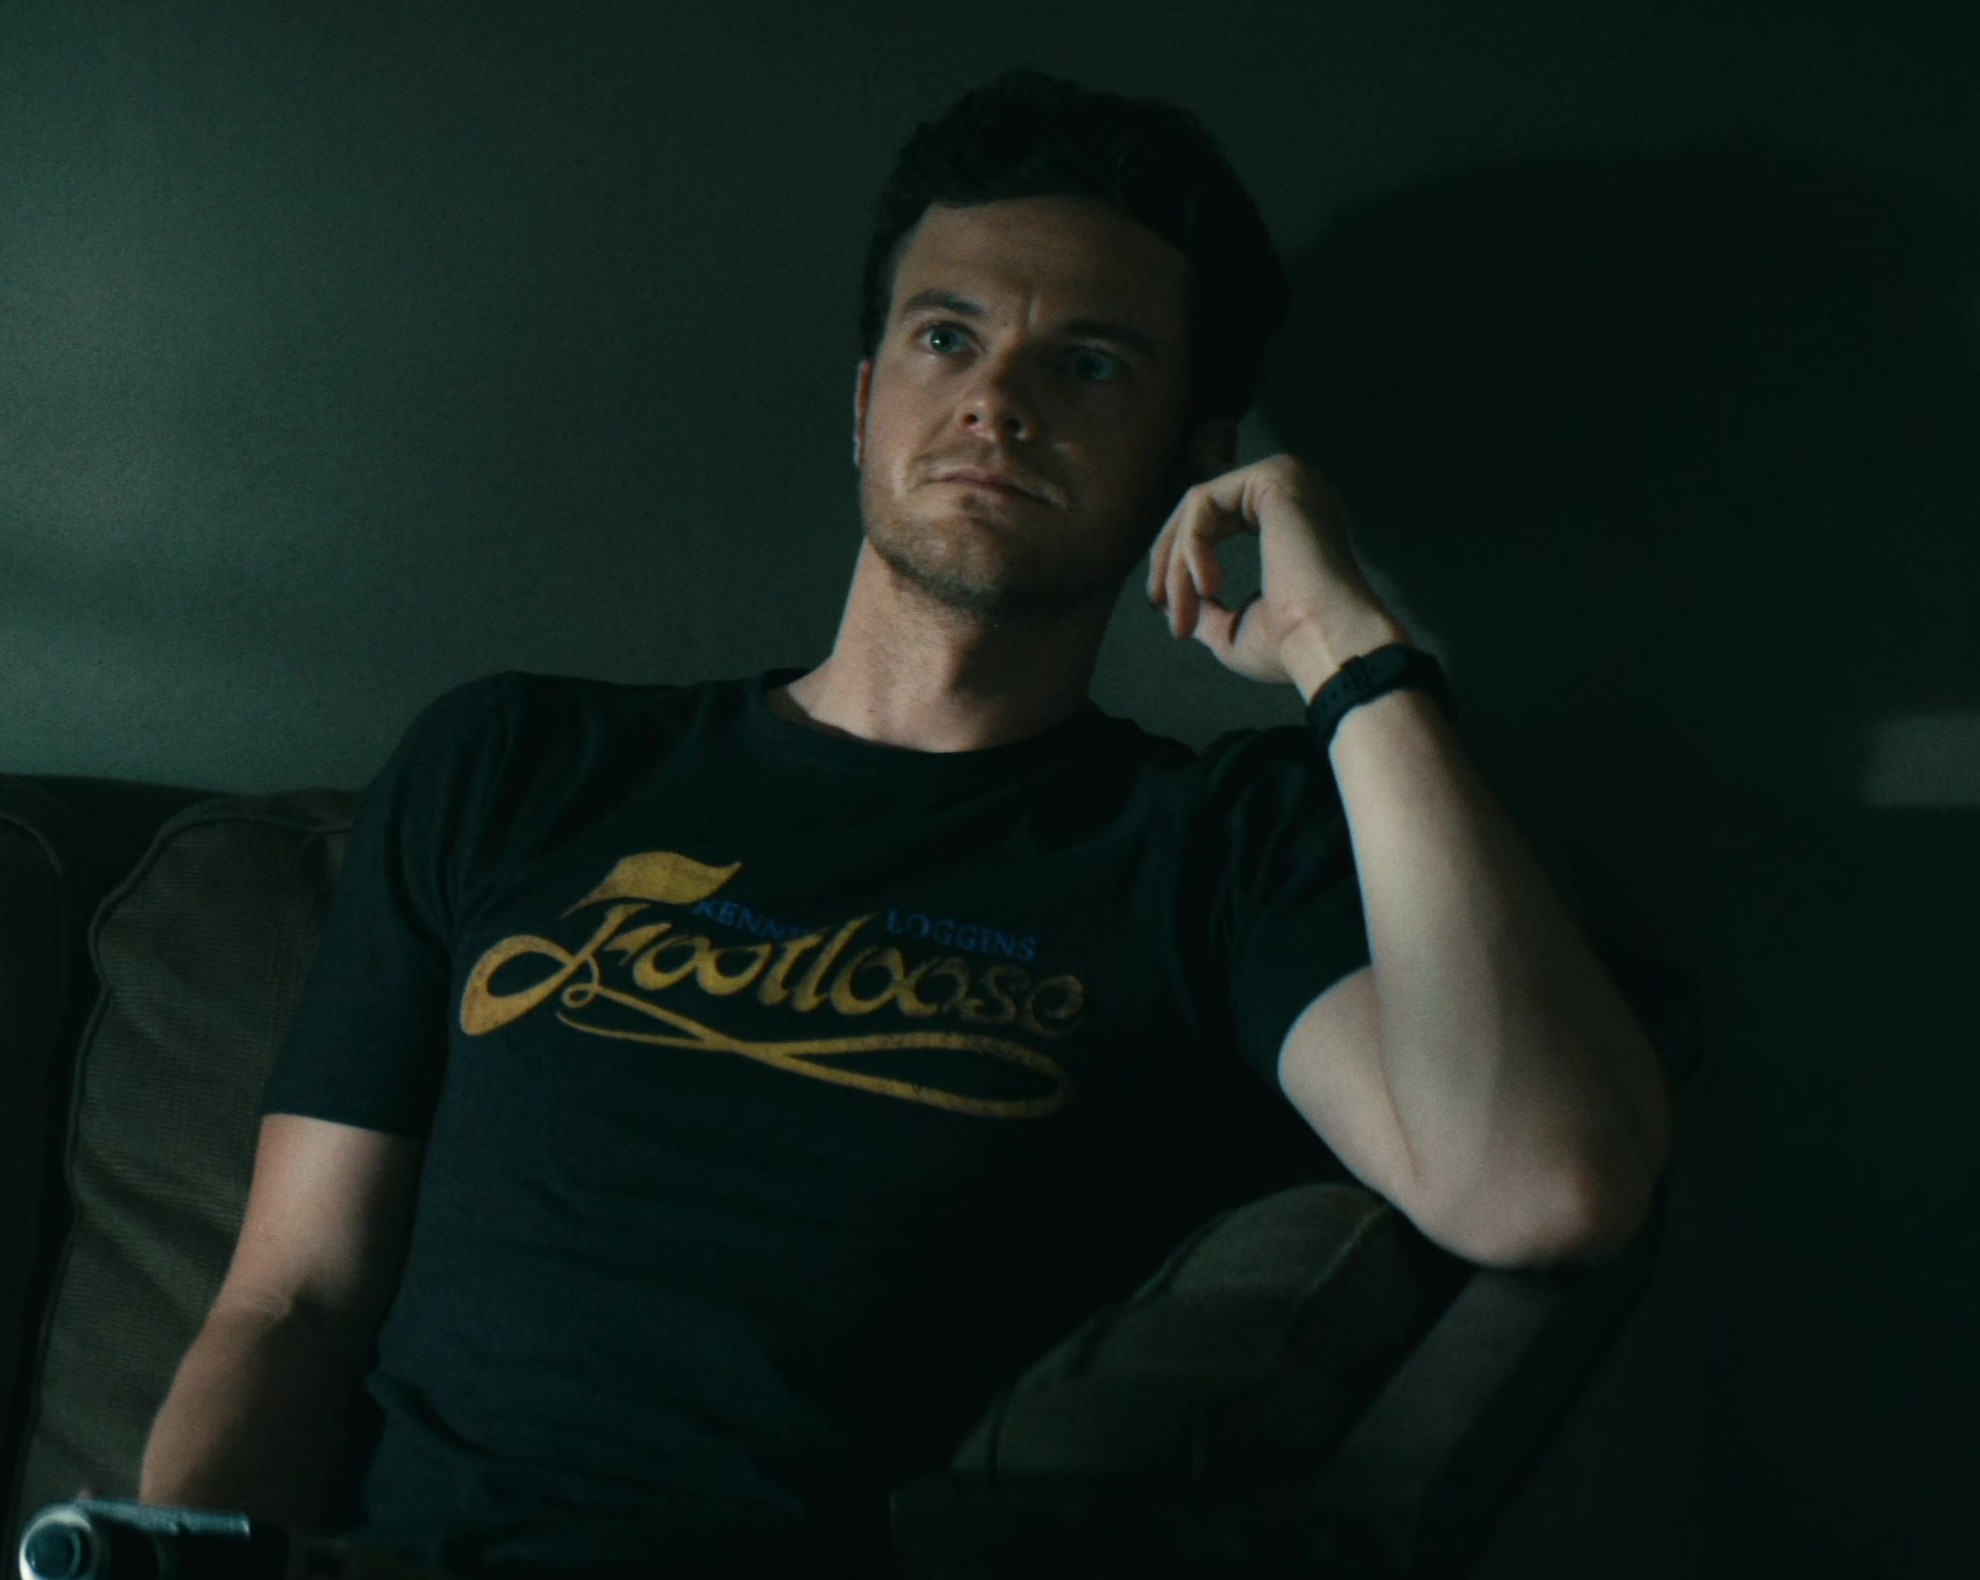 Worn on The Boys TV Show - Kenny Loggins – Footloose T-Shirt Worn by Jack Quaid as Hughie Campbell